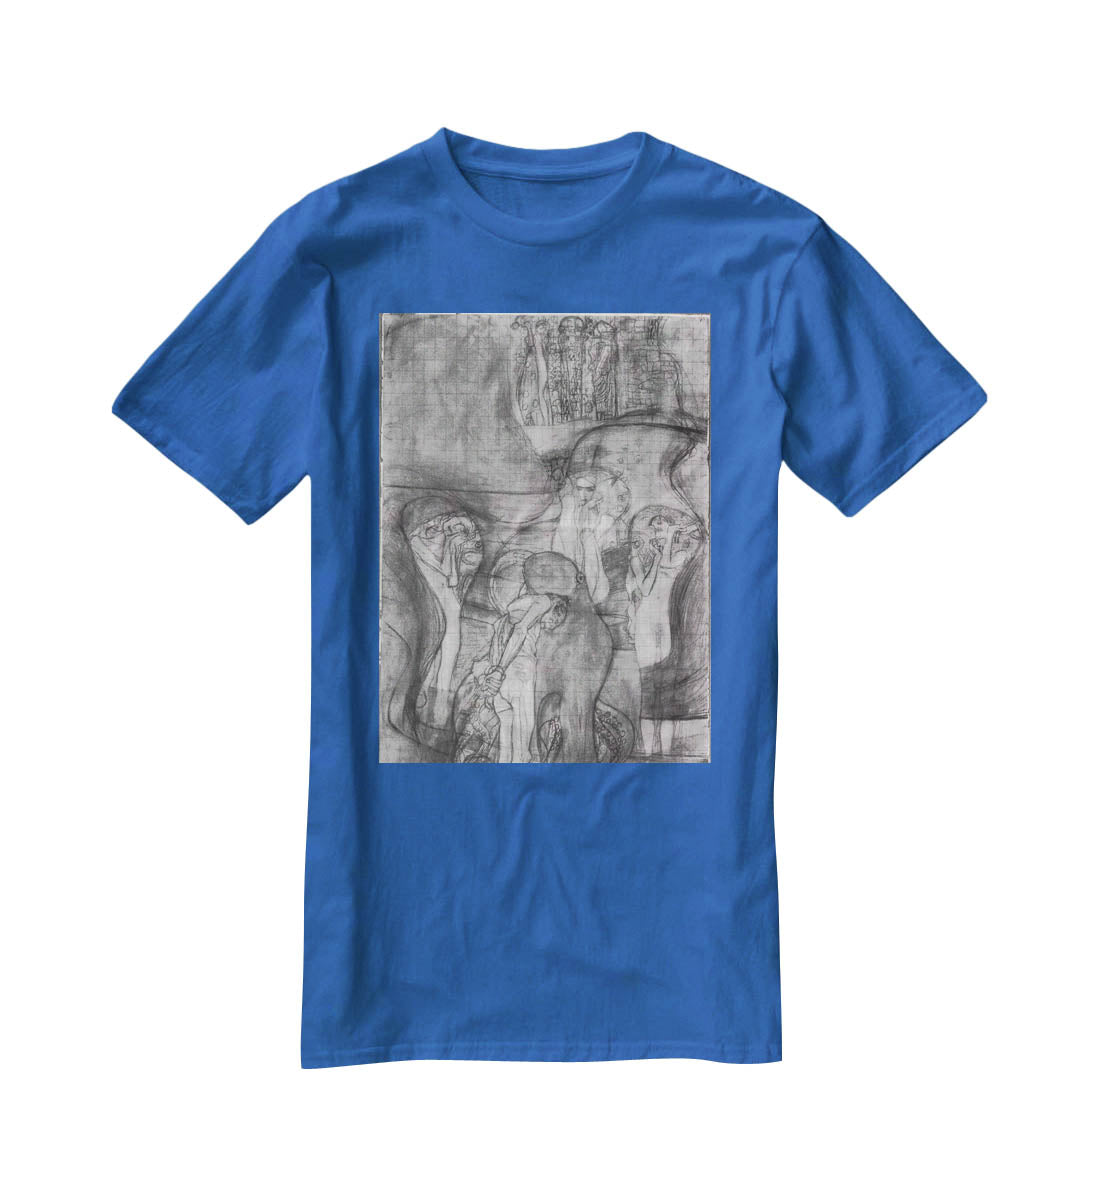 Composition draft of the law faculty image by Klimt T-Shirt - Canvas Art Rocks - 2